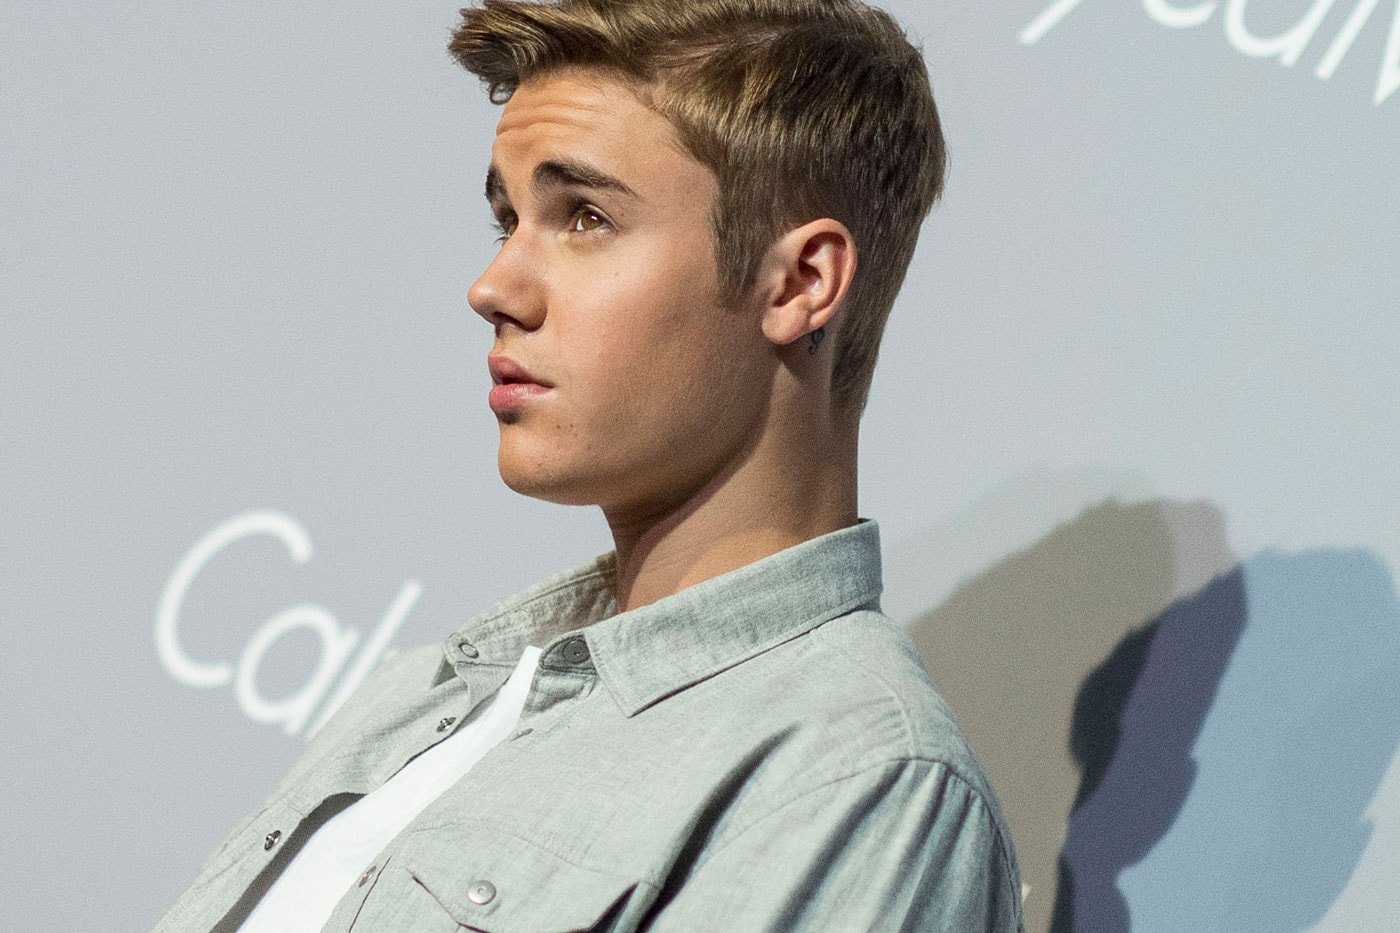 Watch Justin Bieber Perform “What Do You Mean?” at 2015 MTV EMA